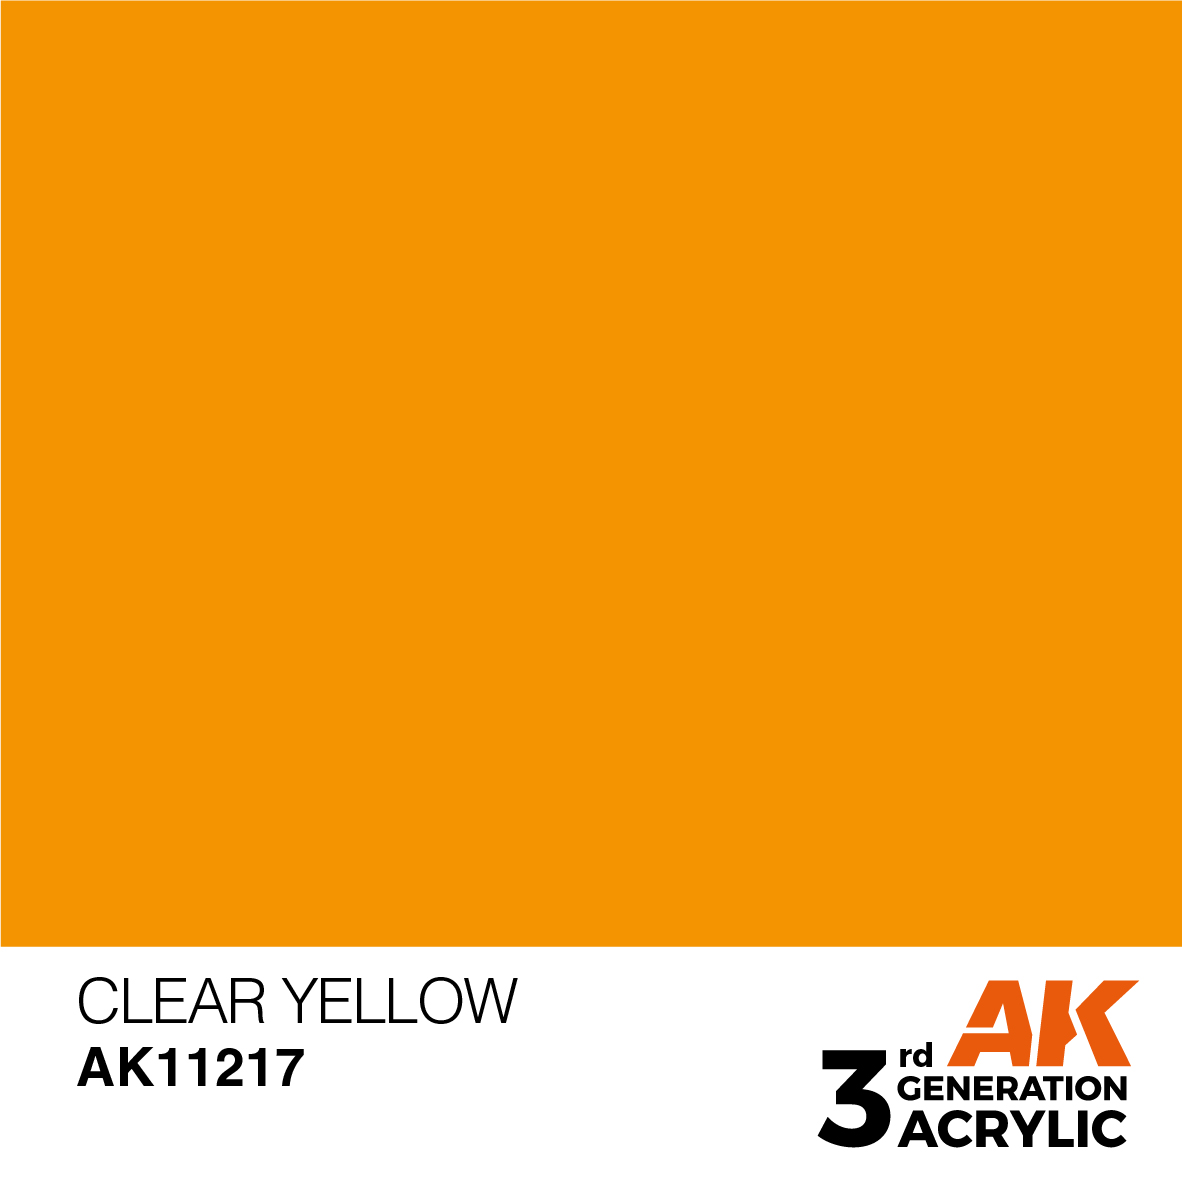 CLEAR YELLOW – STANDARD